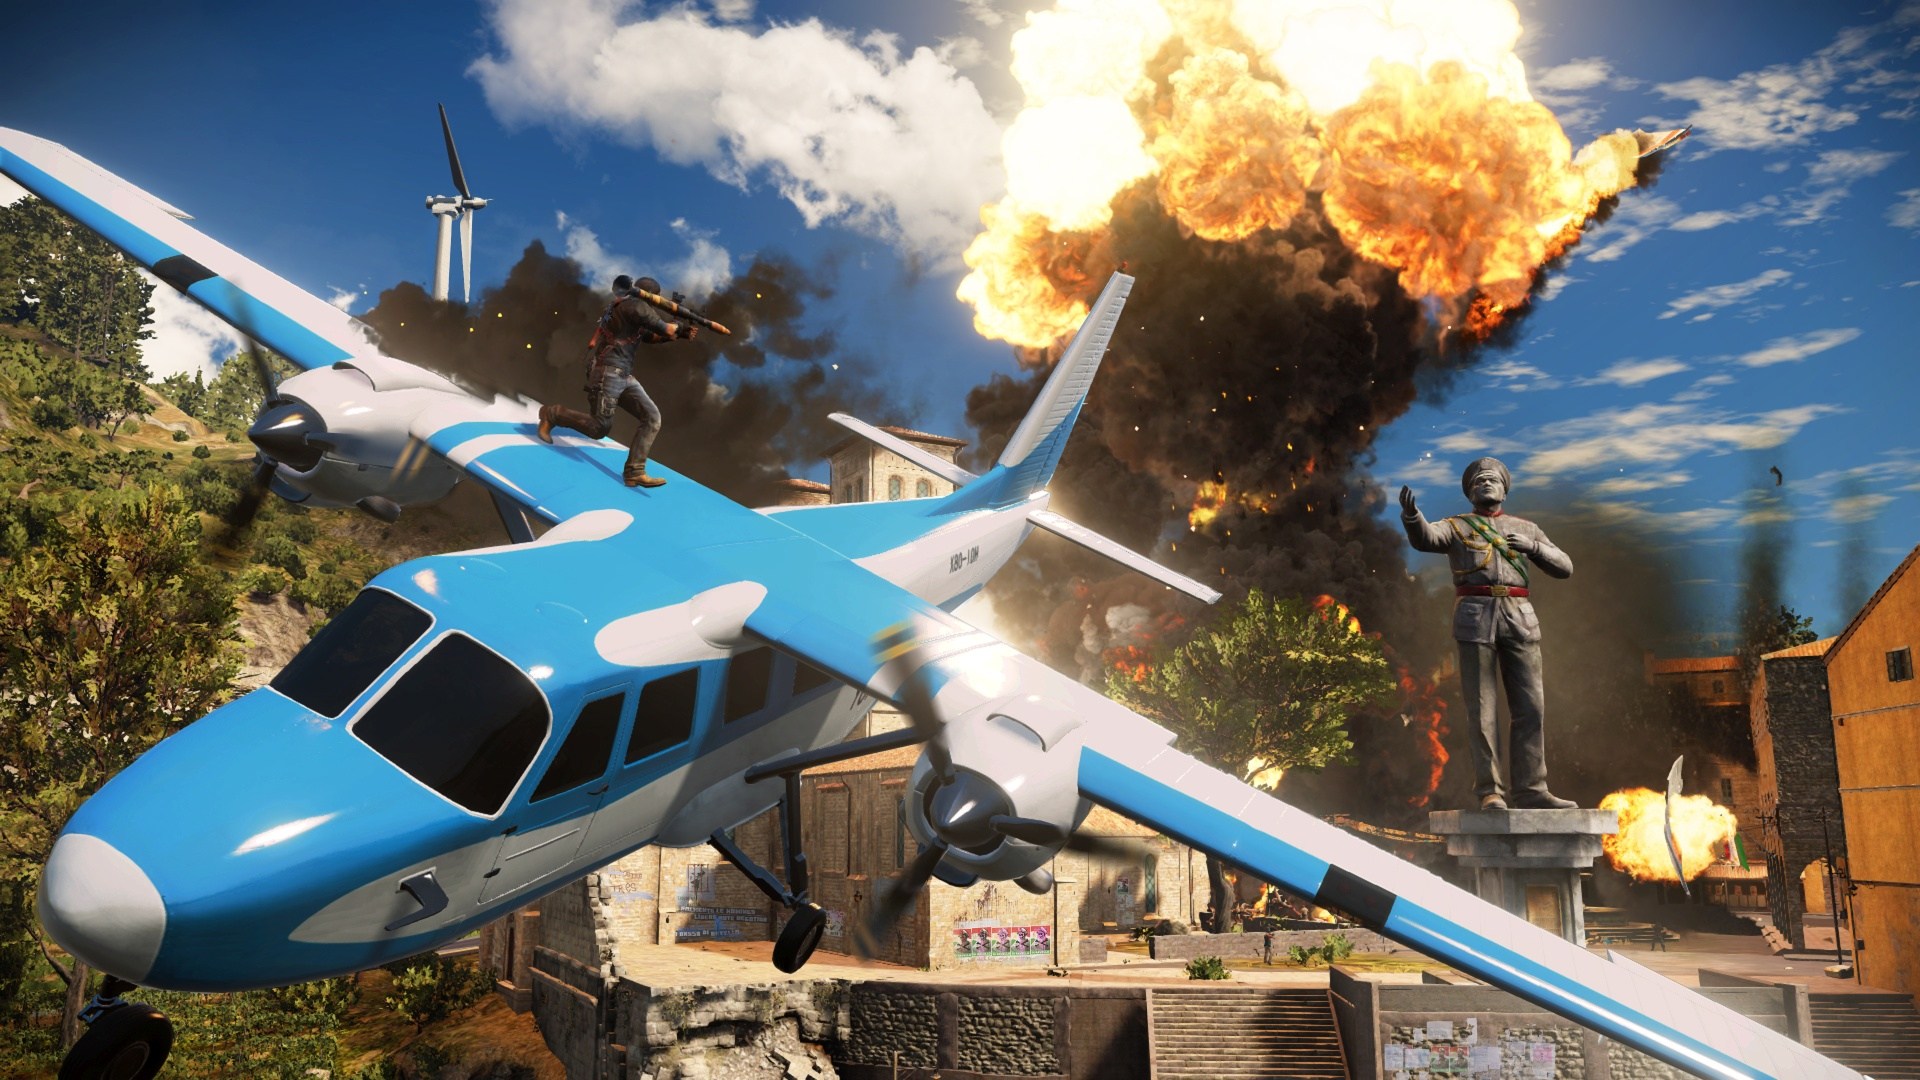 just cause 3 crack download